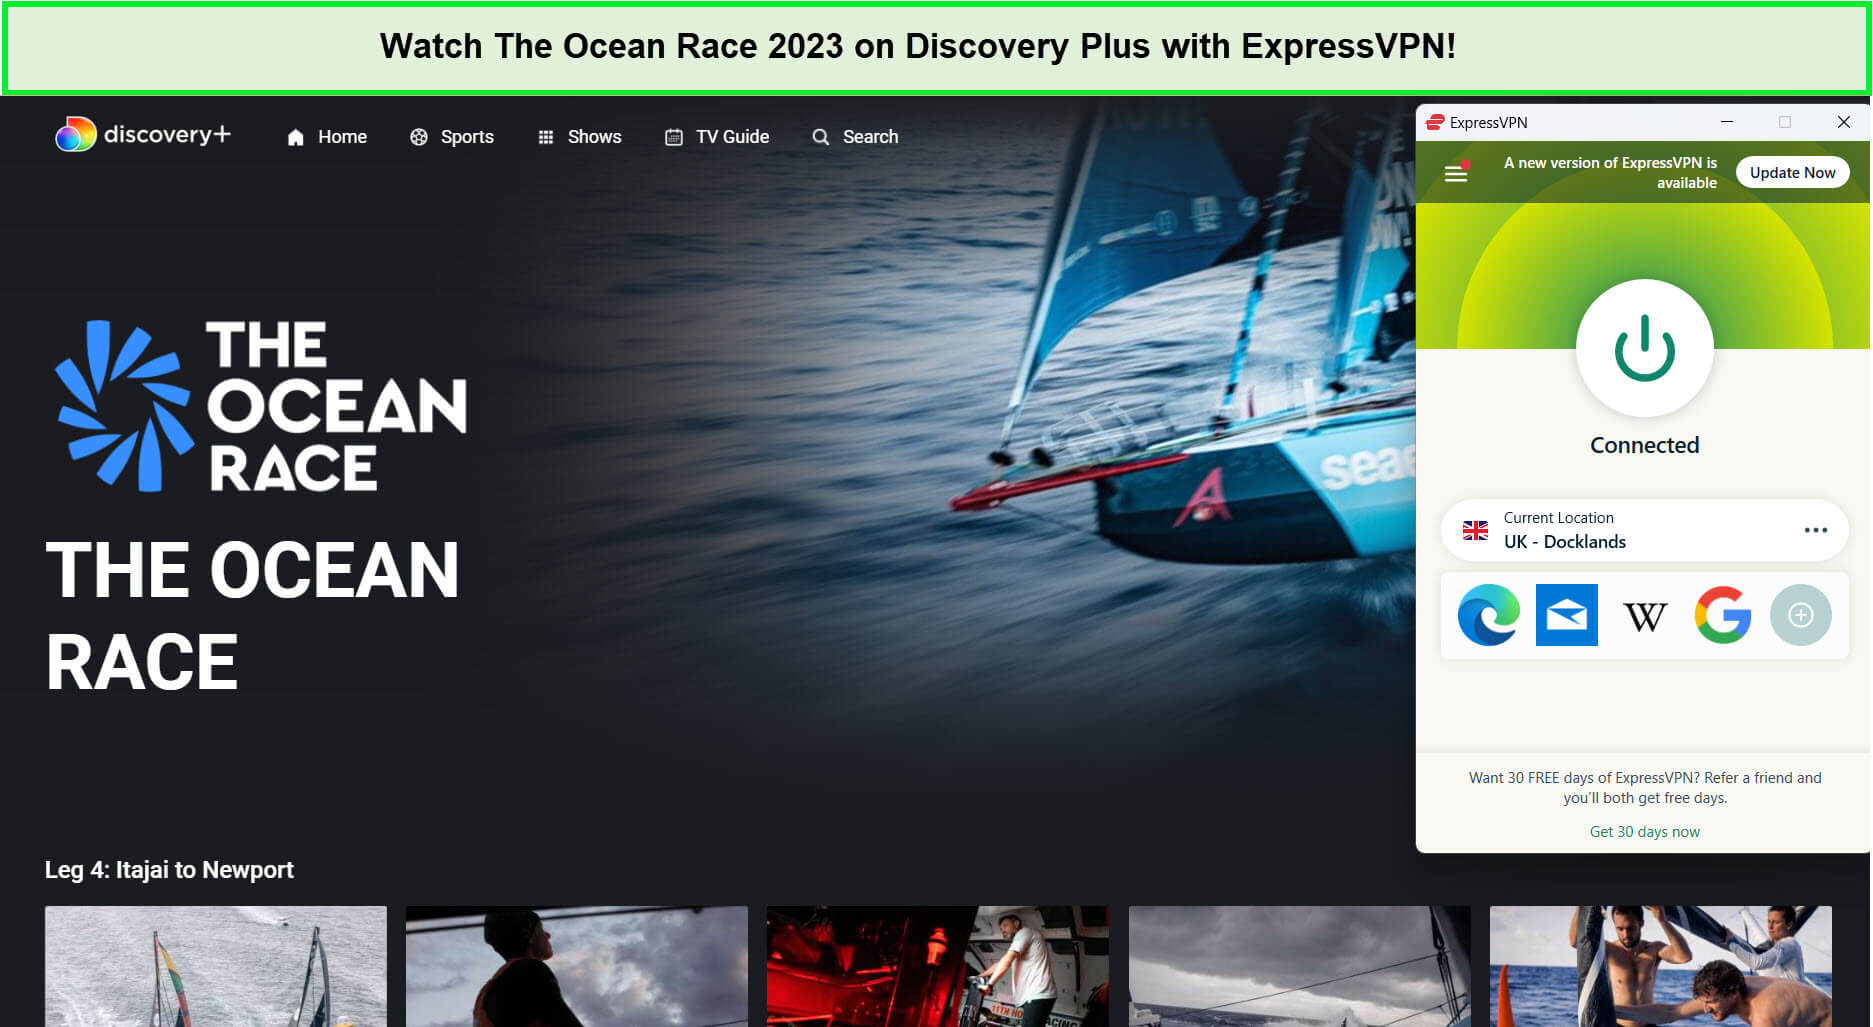 expressvpn-unblocks-the-ocean-race-2023-live-outside-UK-on-discovery-plus